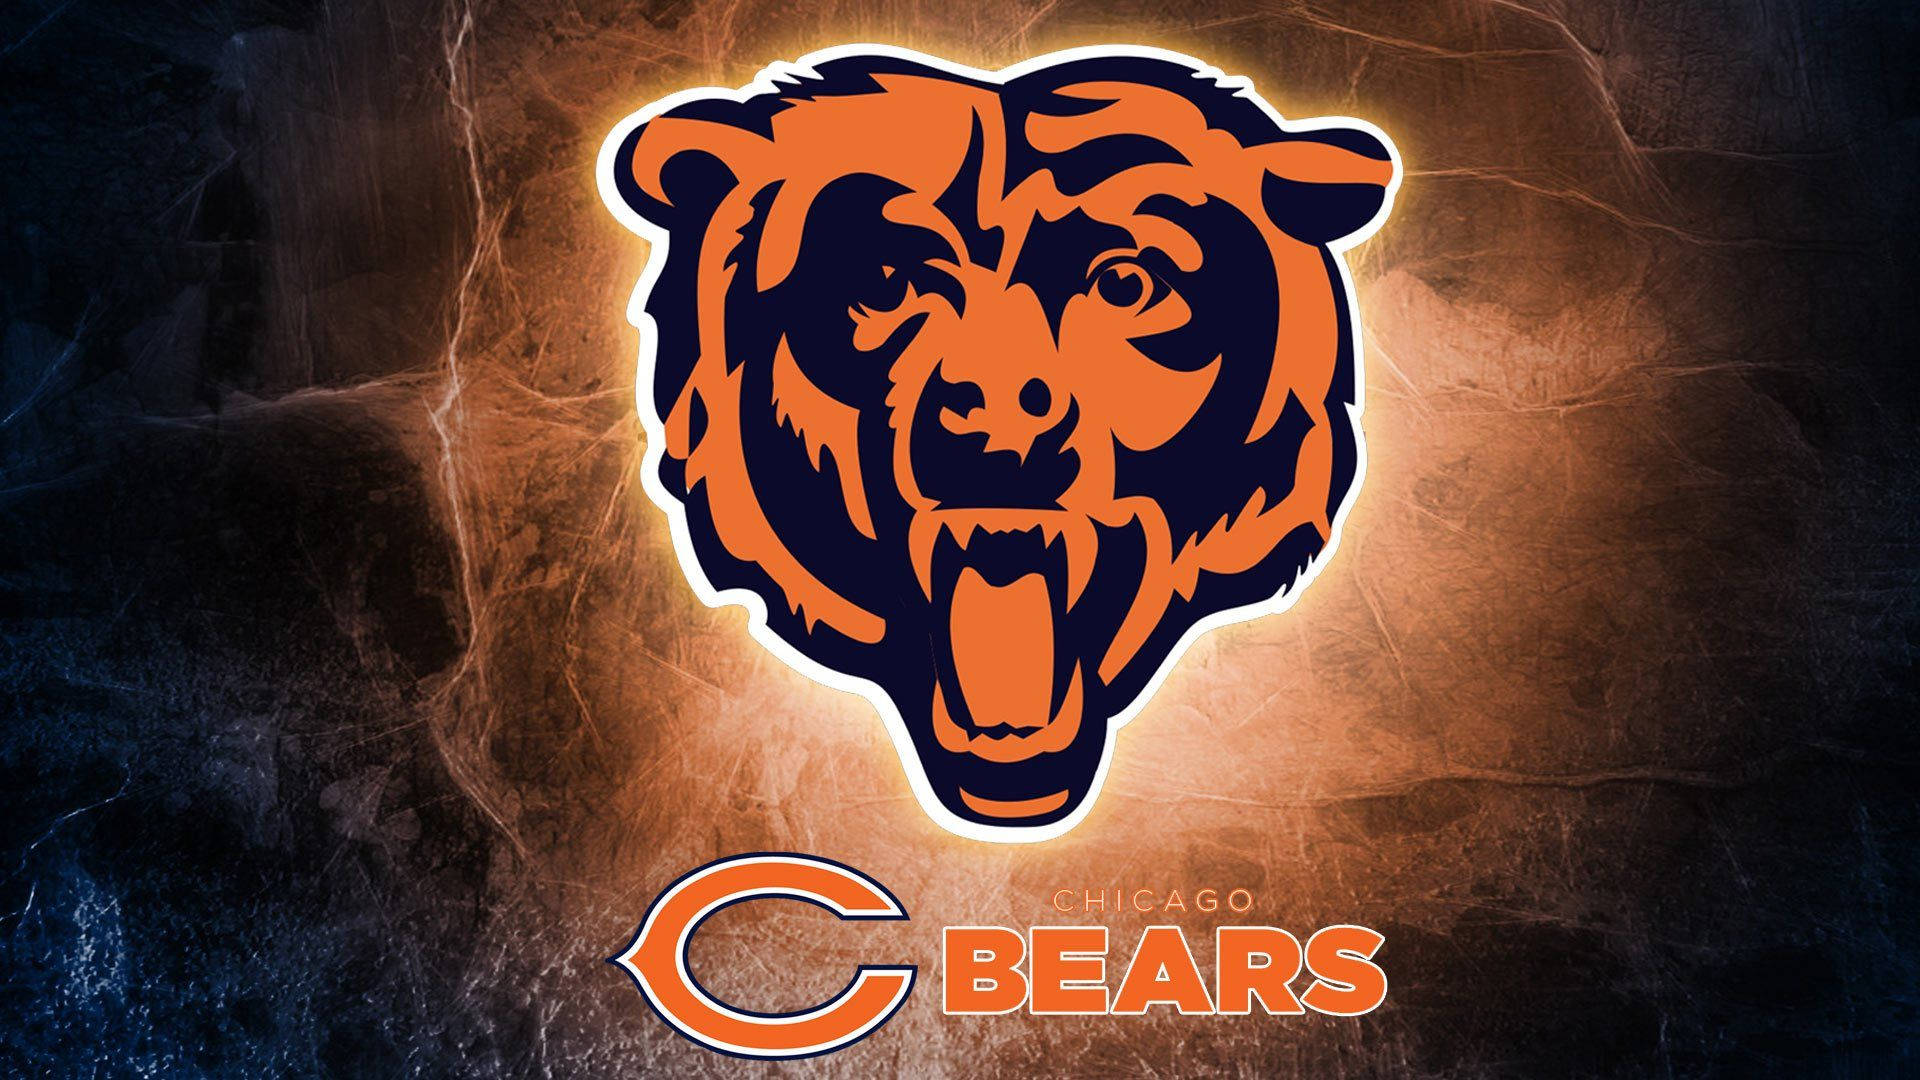 Hd Glowing Chicago Bears Background